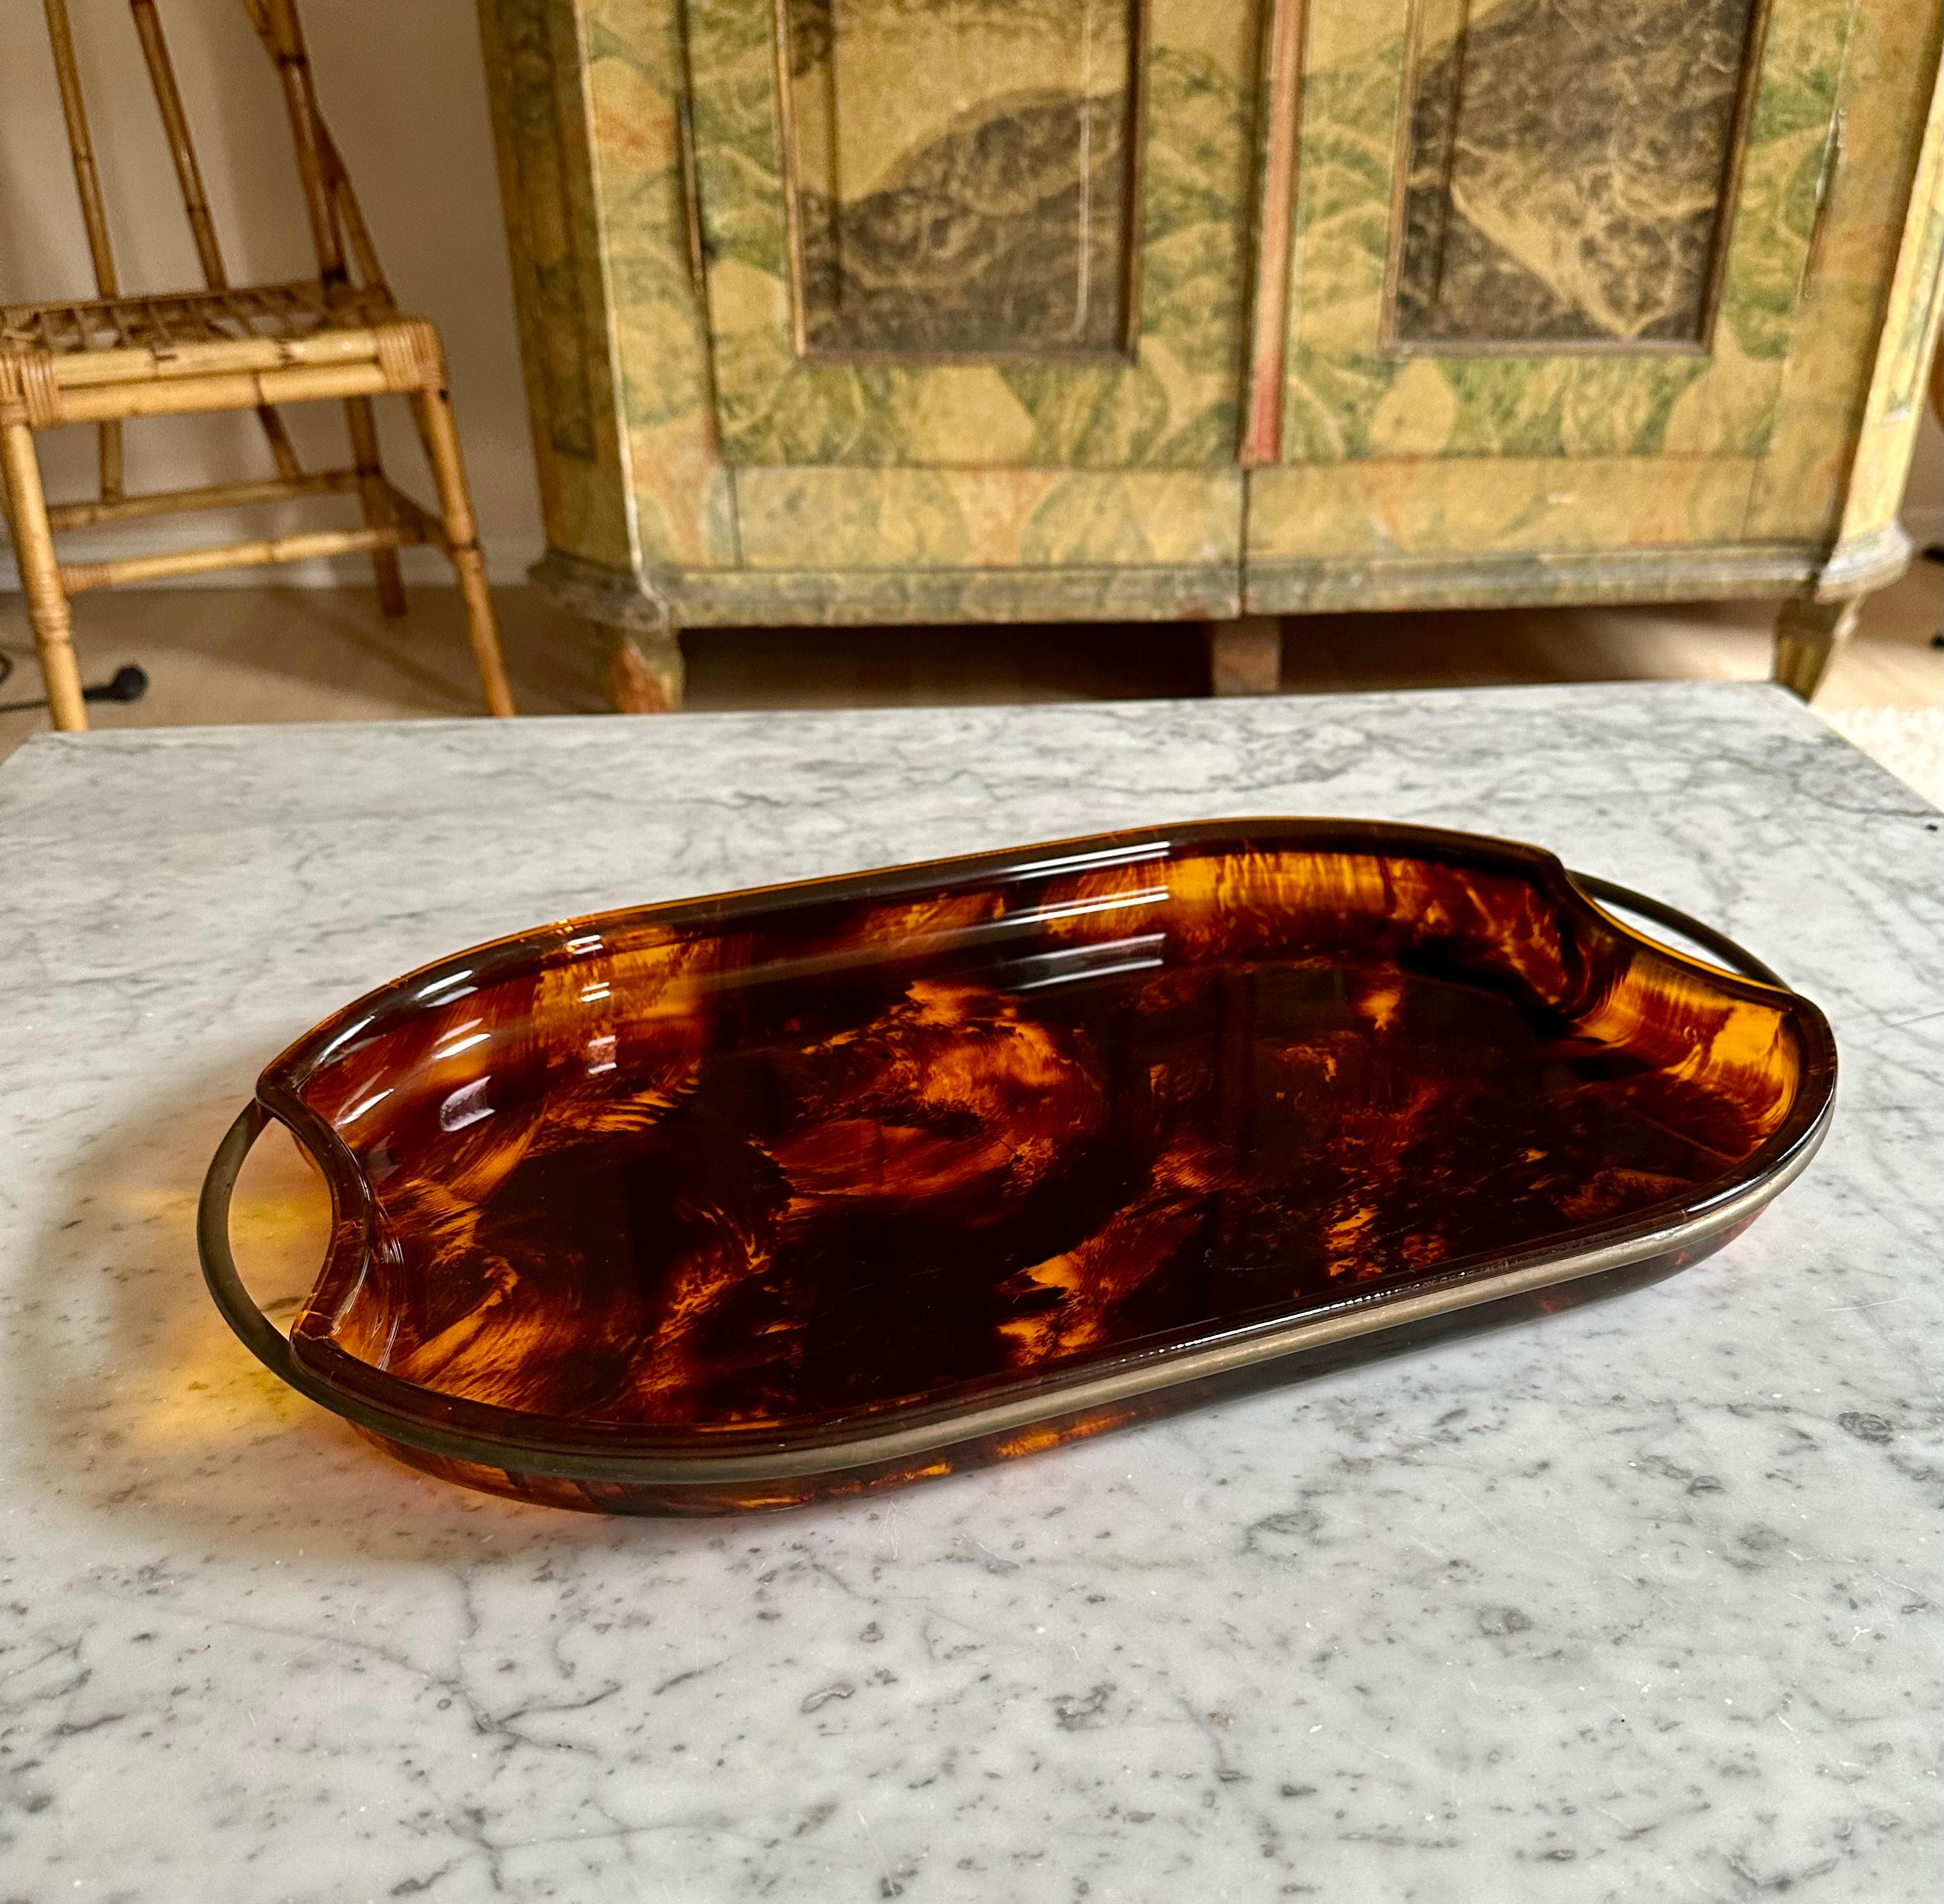 Indulge in the timeless elegance of this midcentury oval serving tray from the illustrious design house, Guzzini, hailing from the artistic landscape of Italy in the 1970s. Crafted with meticulous attention to detail, this exquisite tray seamlessly